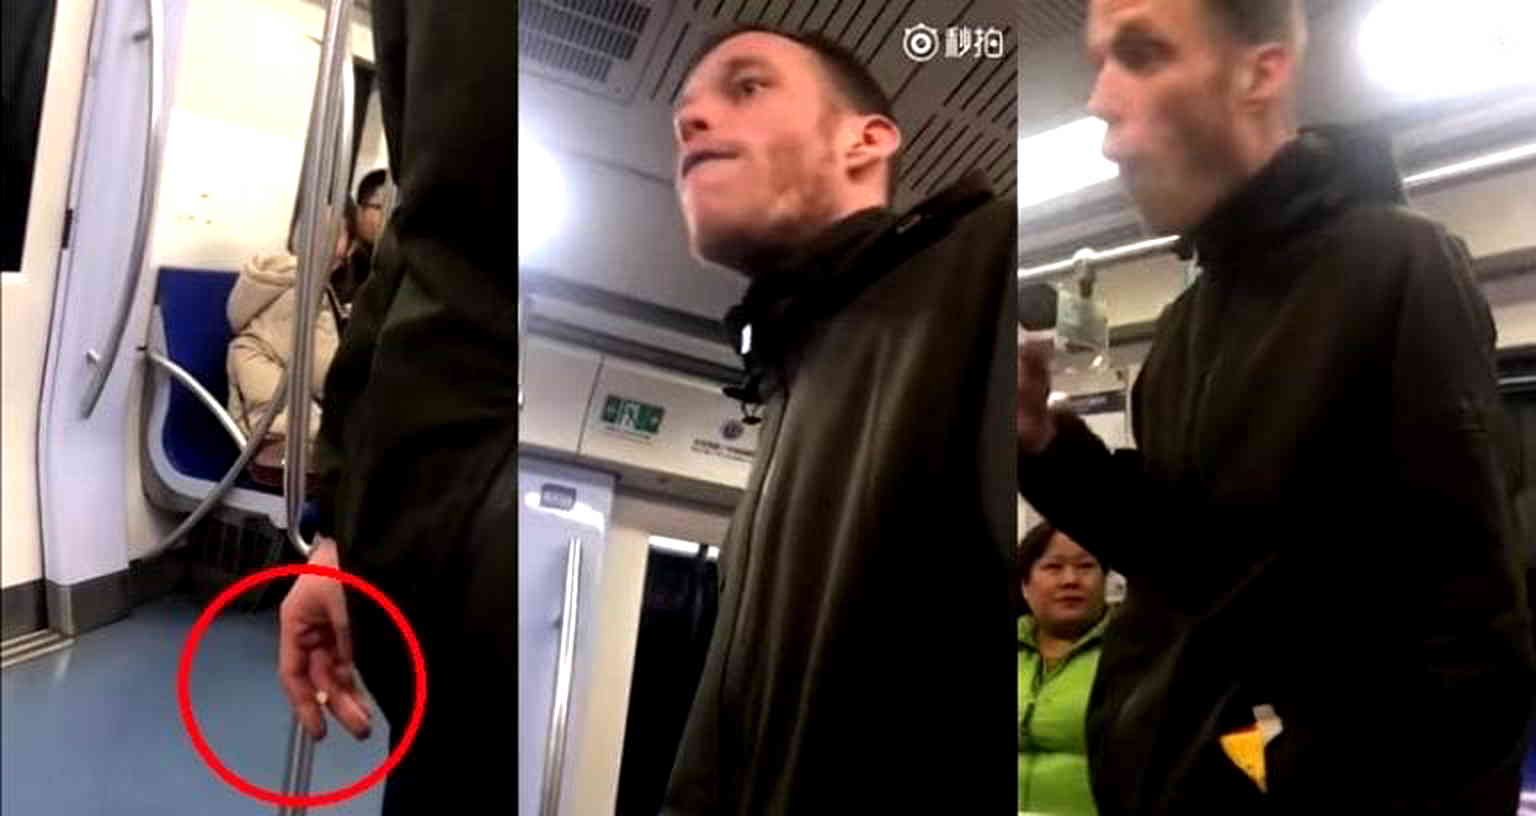 Chinese Passengers Angrily Confront Foreigner Smoking a Cigarette in Beijing Train